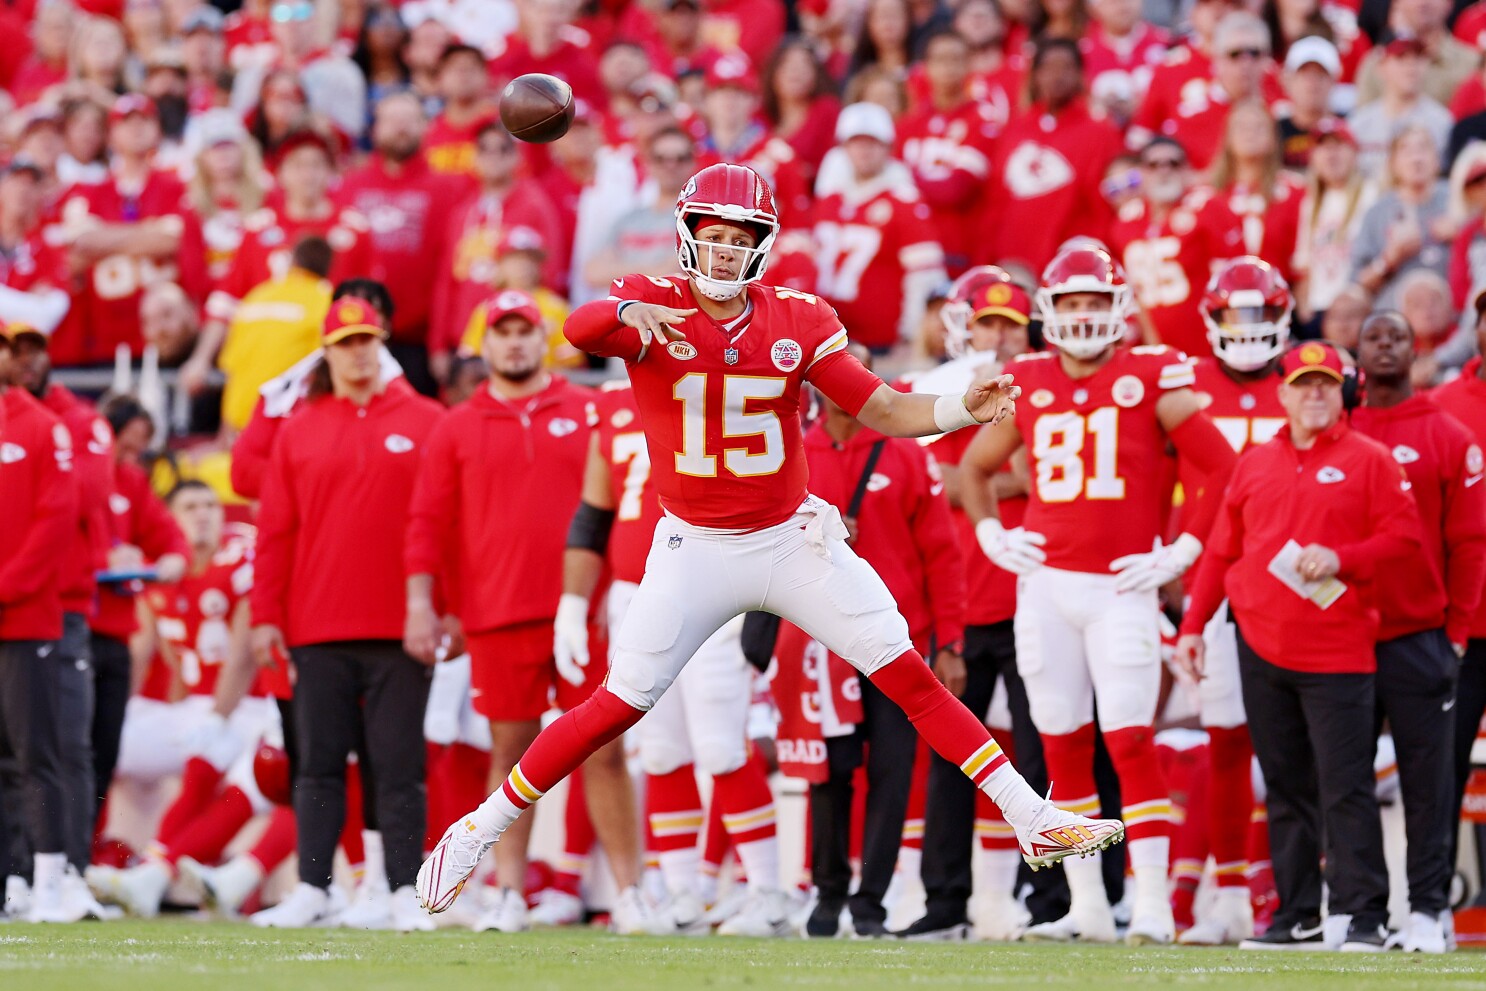 Patrick Mahomes throws 4 TDs, Chiefs beat Chargers 31-17 - NBC Sports